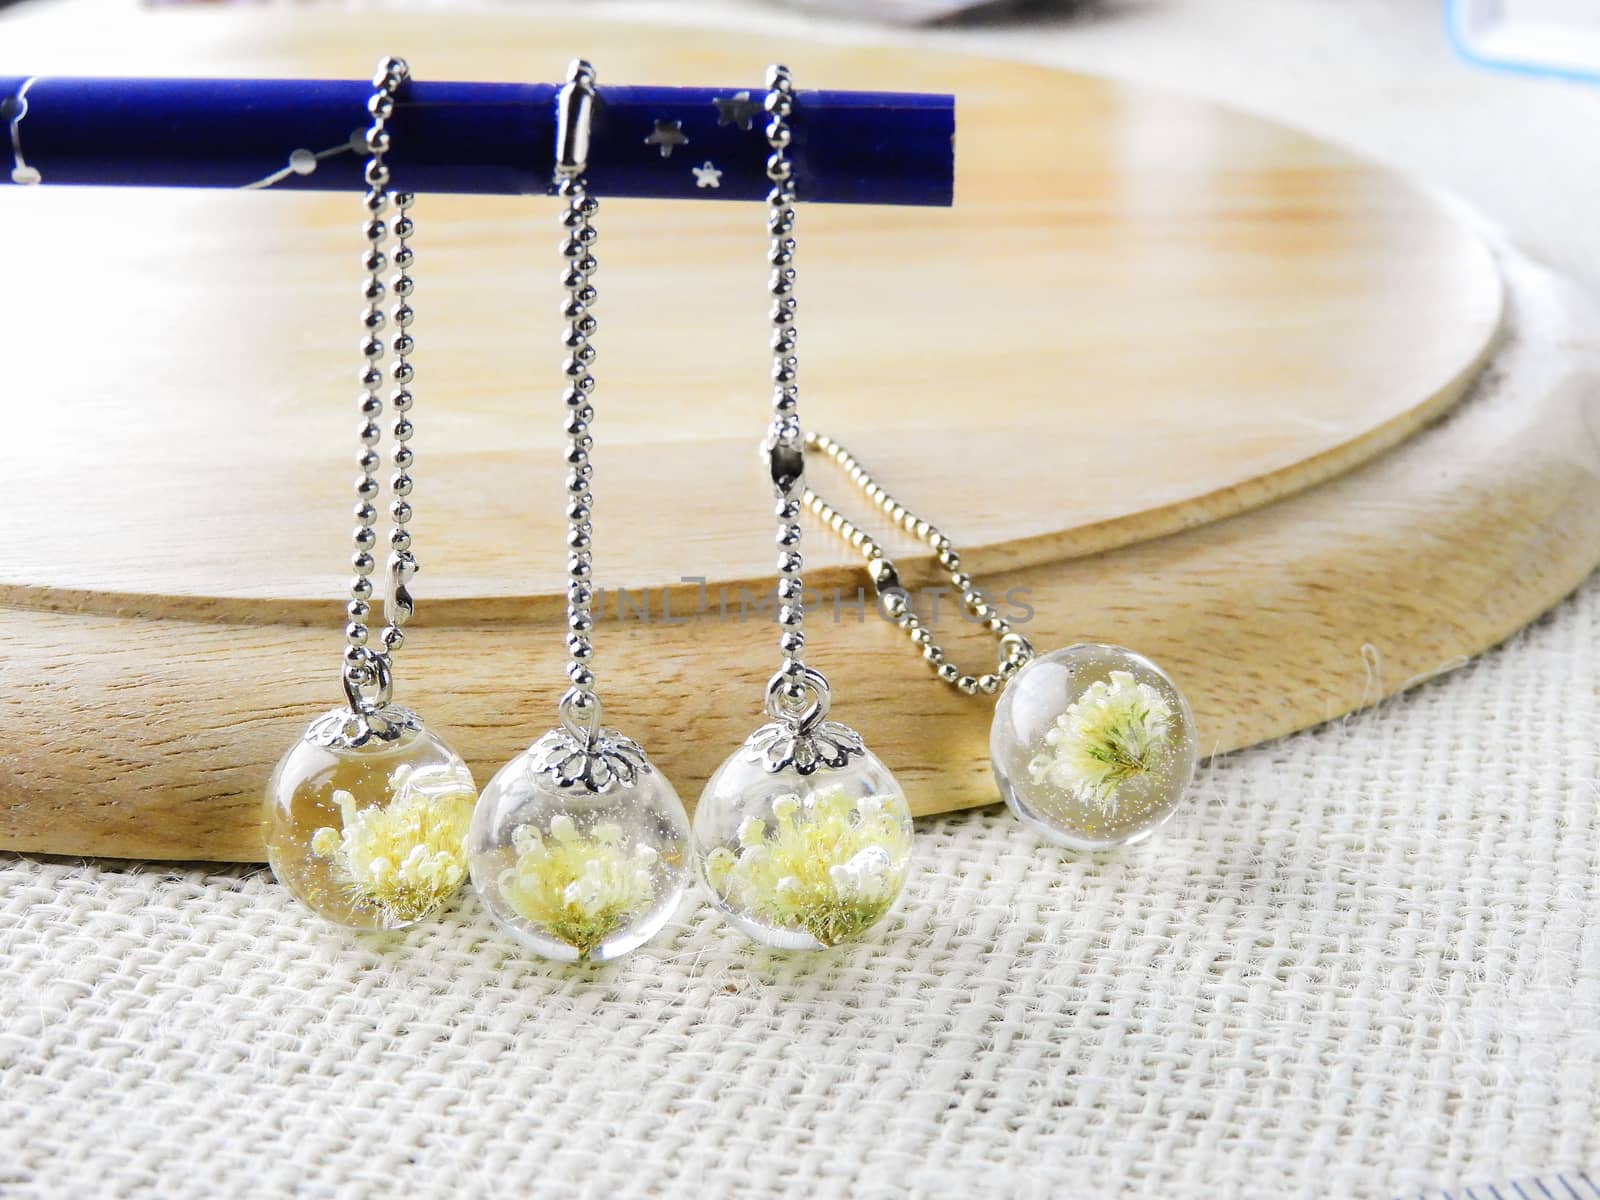 Dried flower in crystal clear resin pendant necklace, pendant wi by yuiyuize